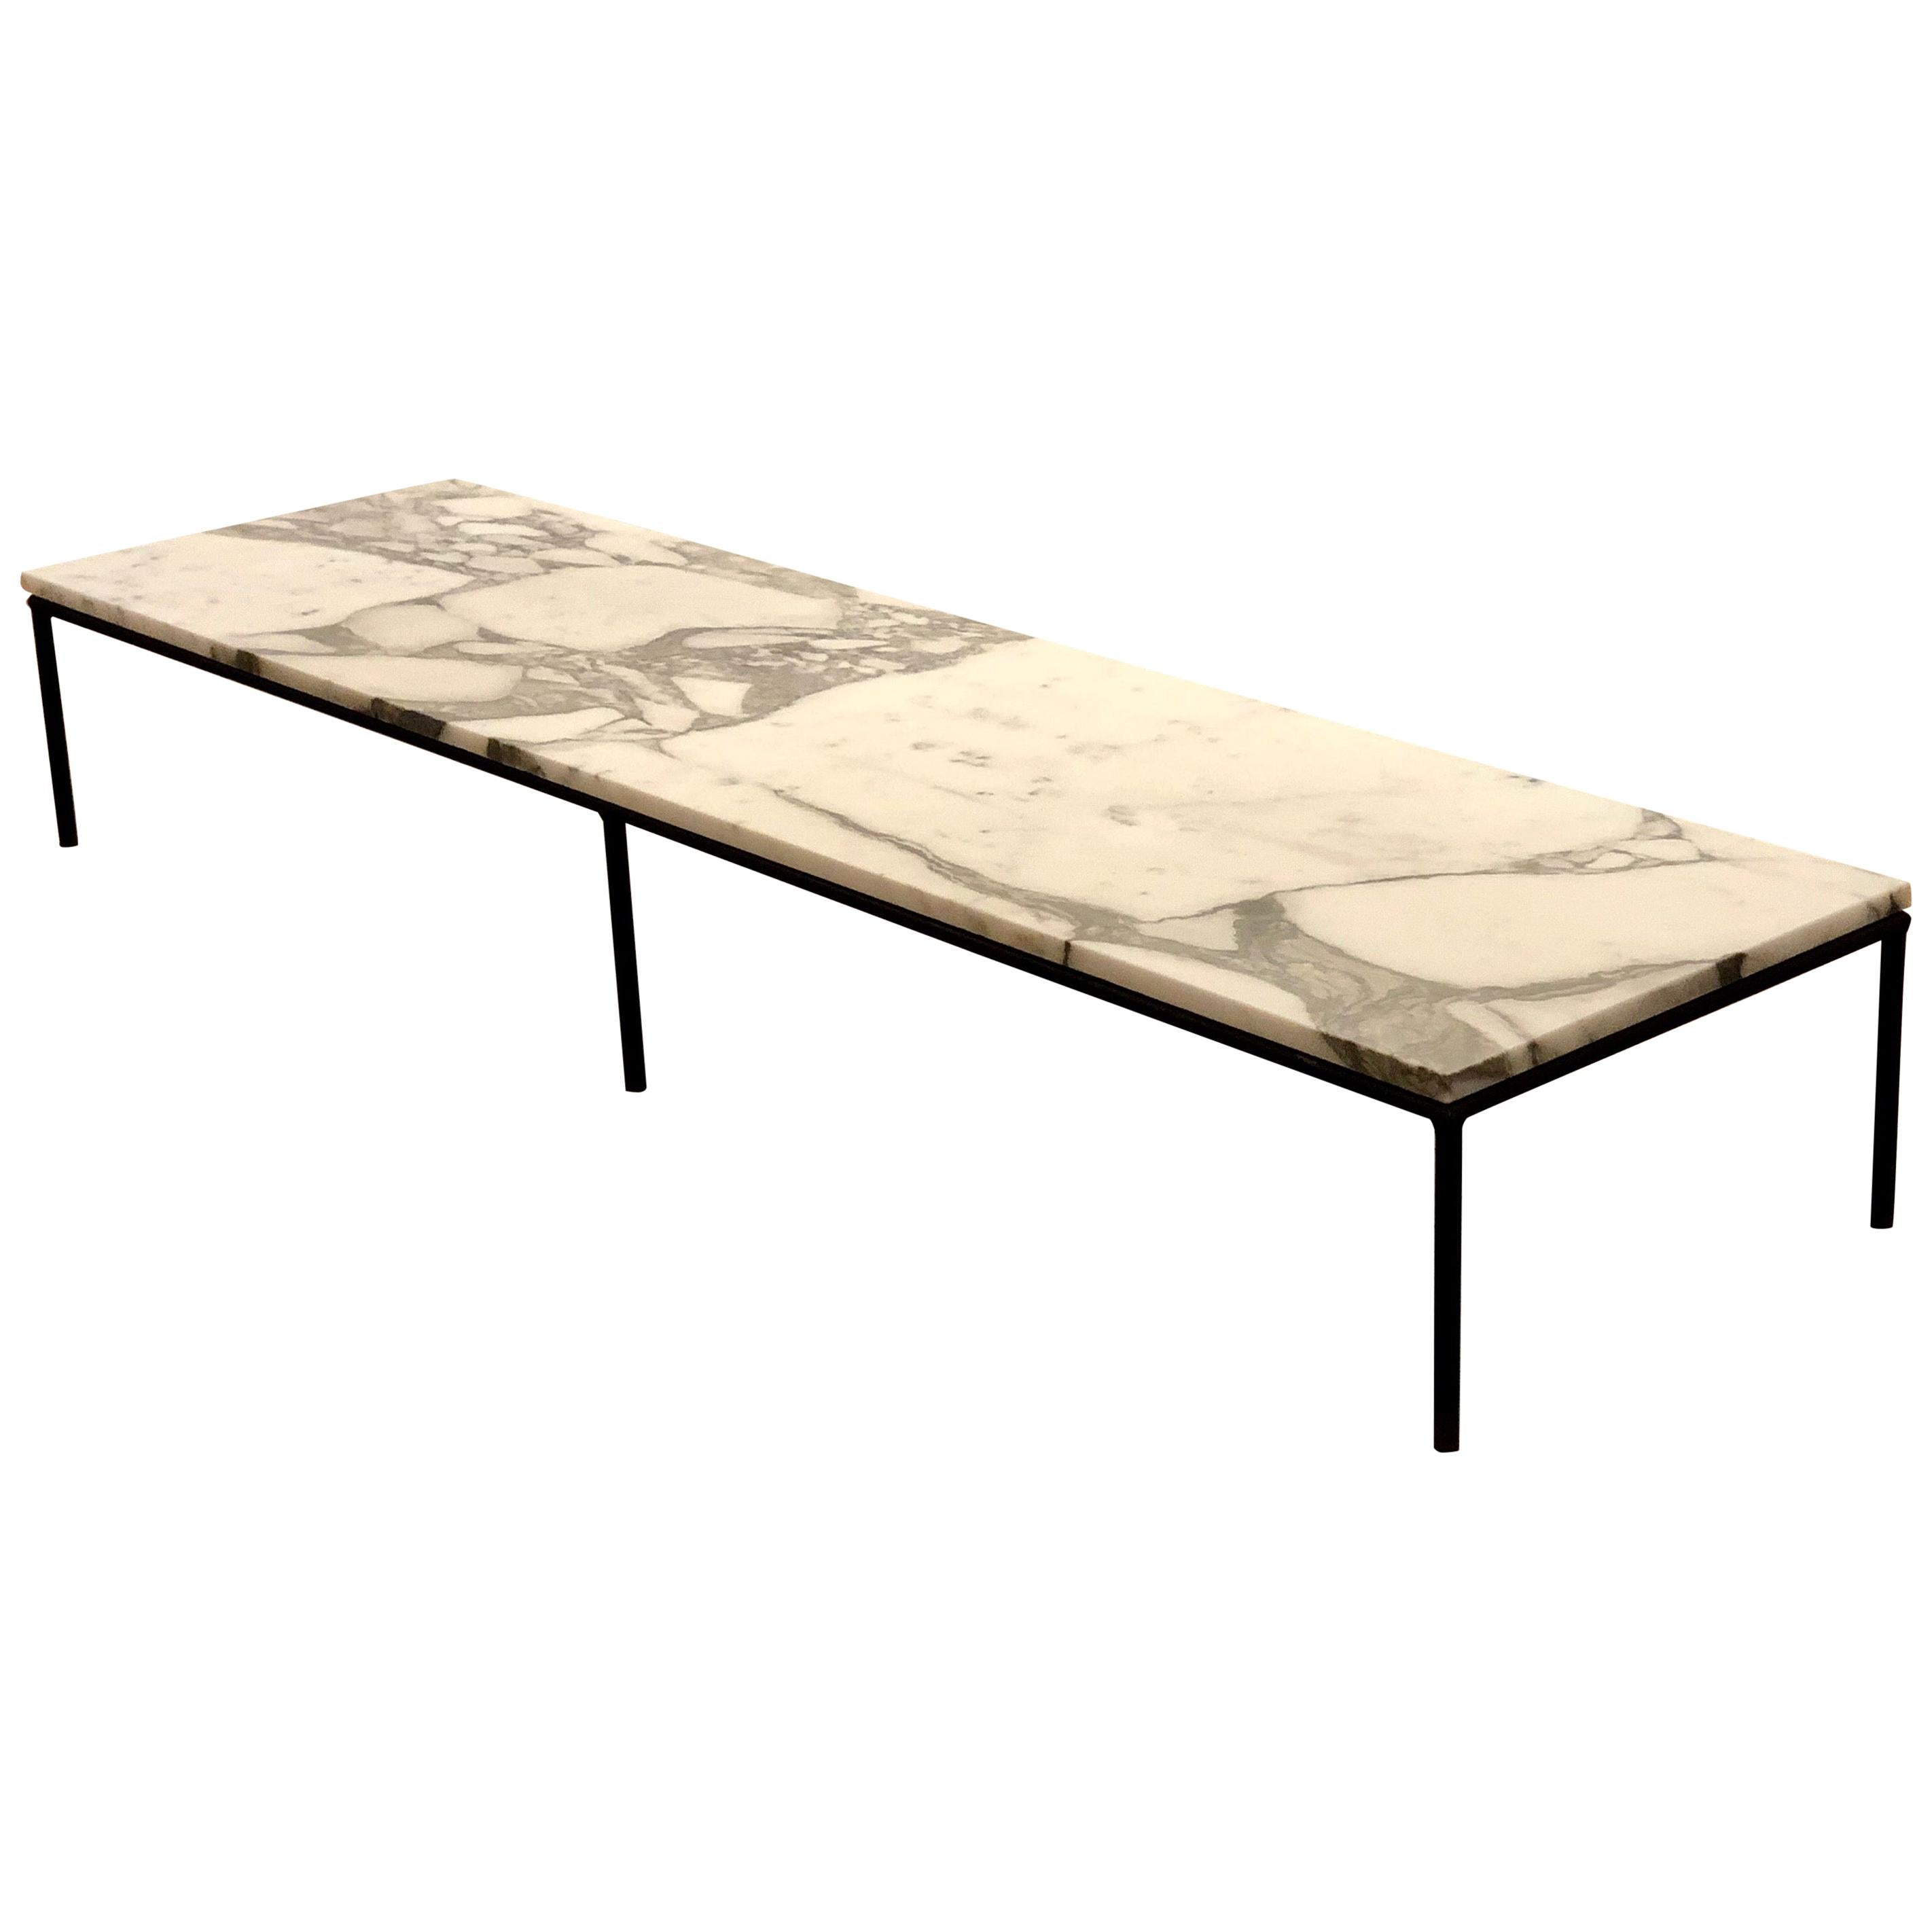 1950s Rare Long and Low Coffee Table Marble and Iron Designed by Paul McCobb